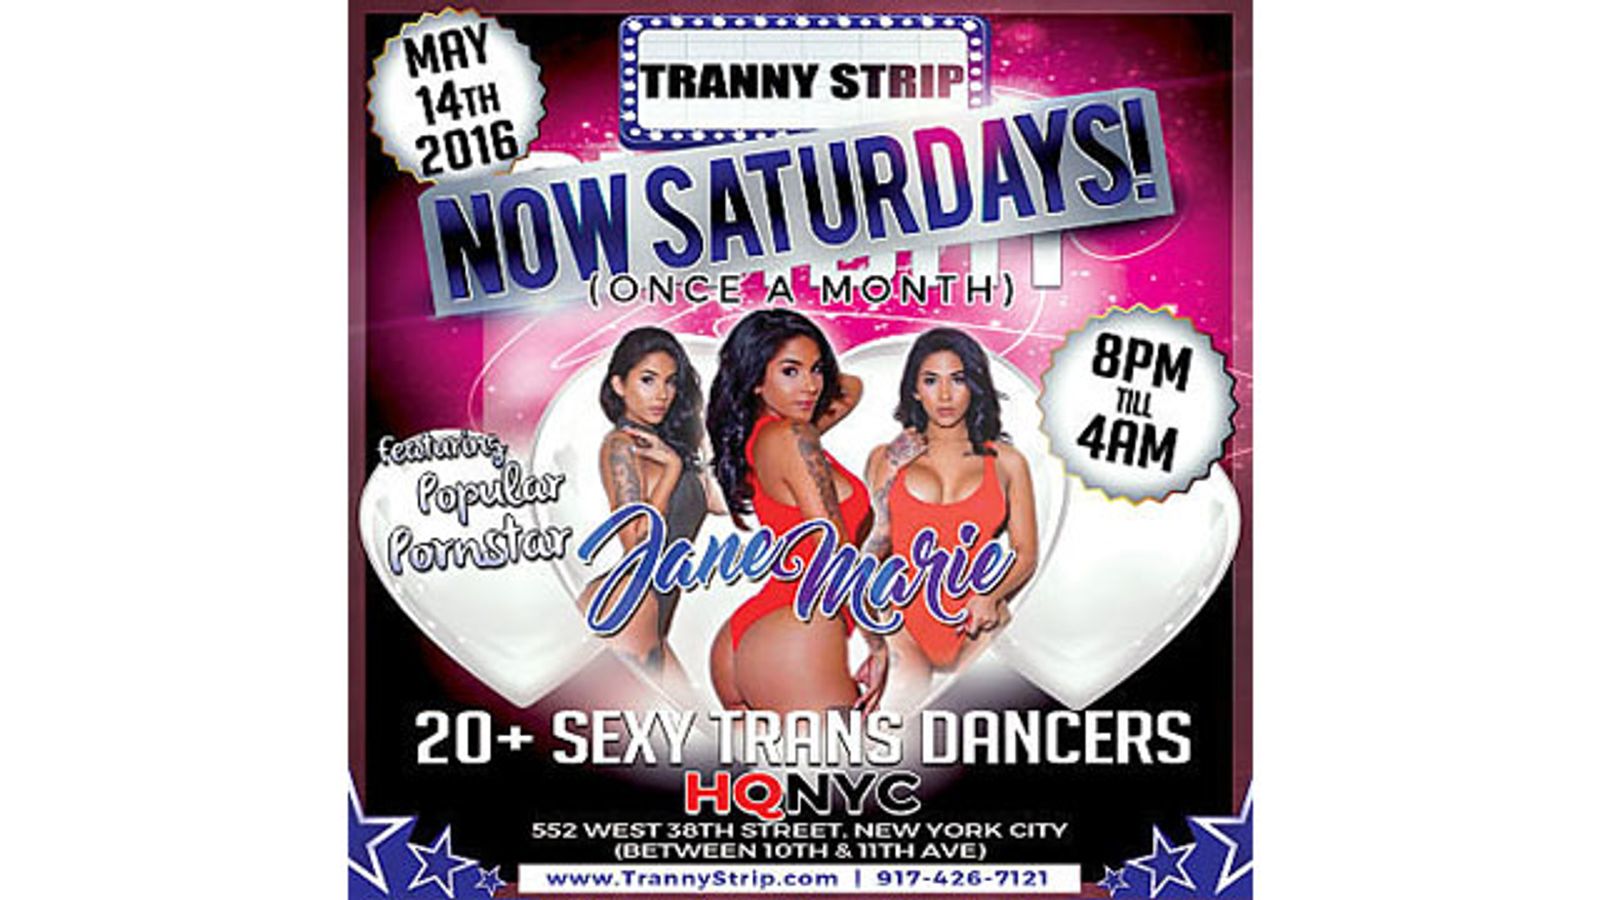 TGirl Events Hosting Tranny Strip Party at HQNYC May 14